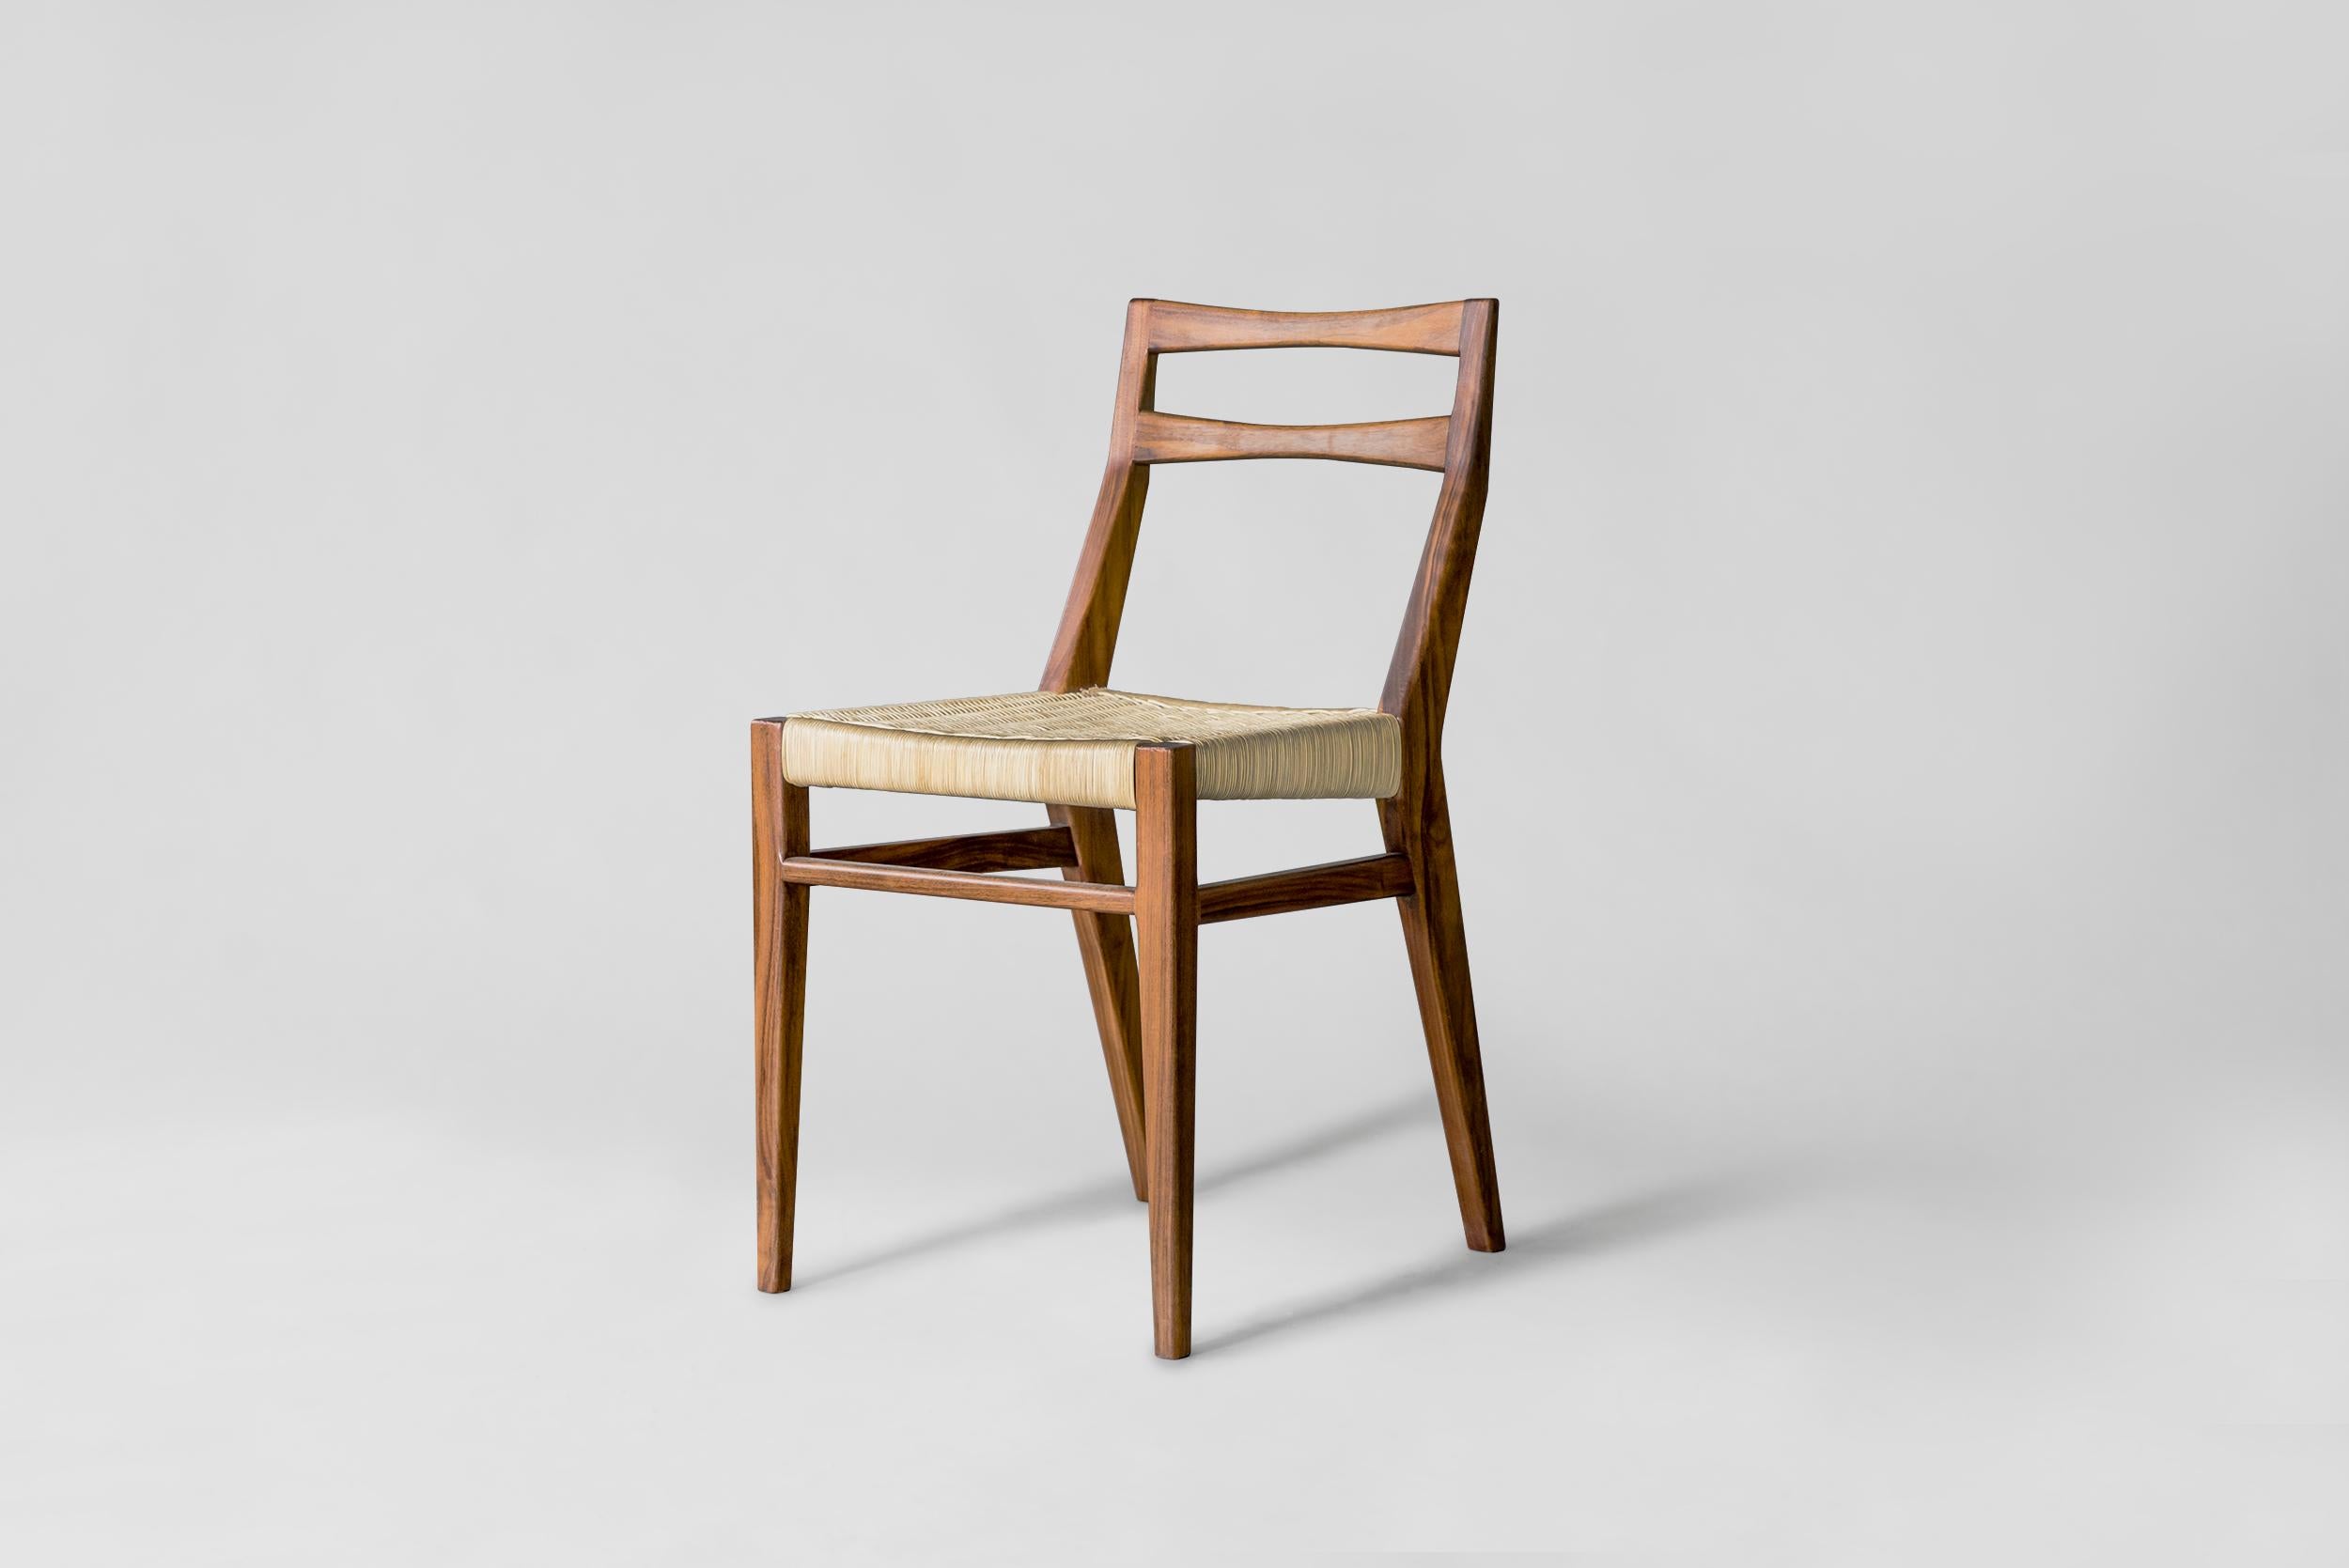 Agnes dining chair by Atra Design
Dimensions: D 44.9 x W 41.9 x H 82 cm
Materials: mahogany, rattan
Available in rattan or rope seat.

Atra Design
We are Atra, a furniture brand produced by Atra form a mexico city–based high end production